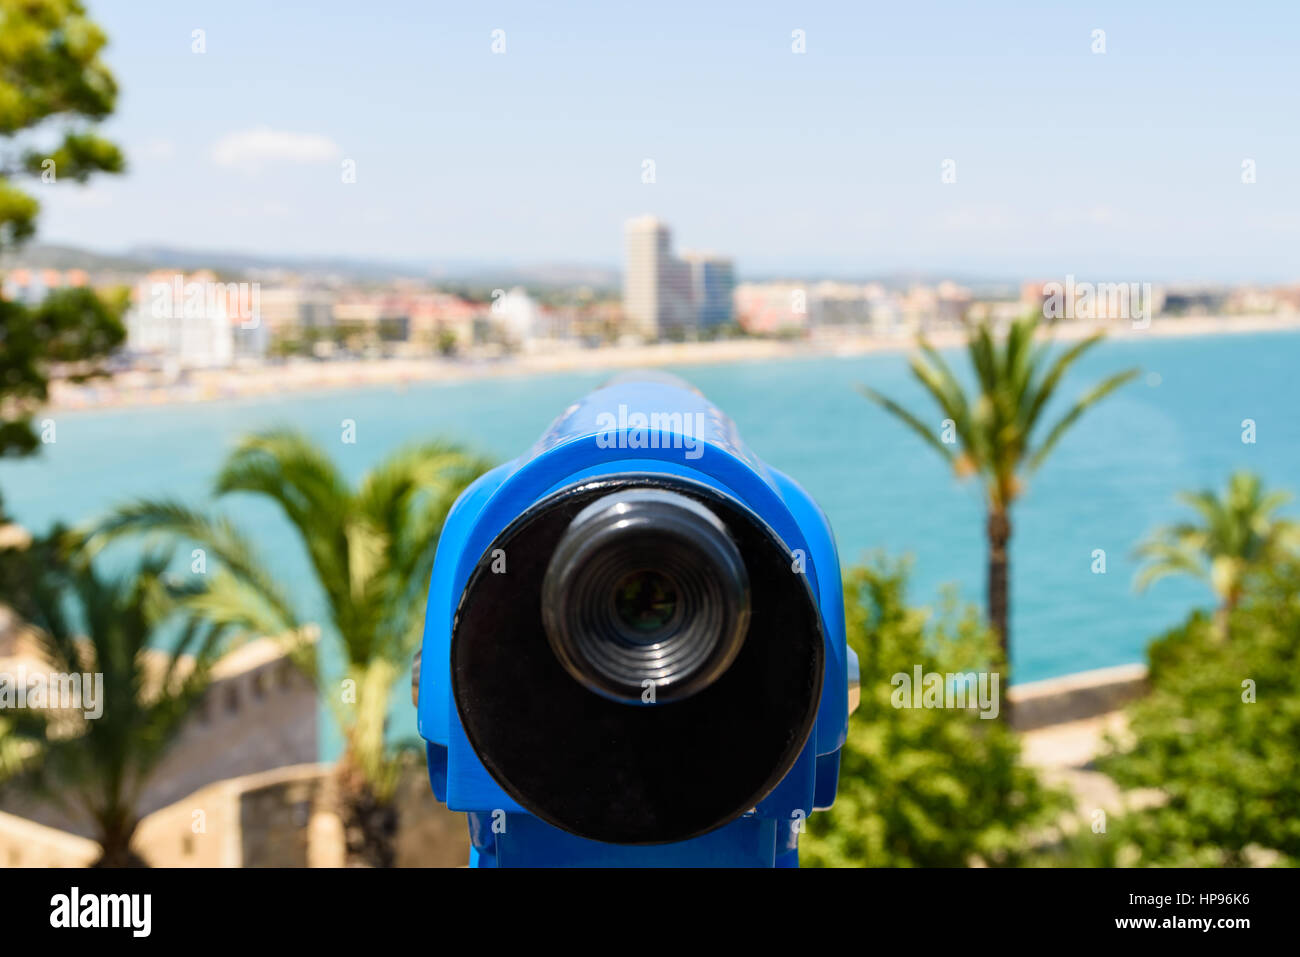 Blue Coin Operated Telescope Of Panoramic Tropical City And Ocean View Stock Photo